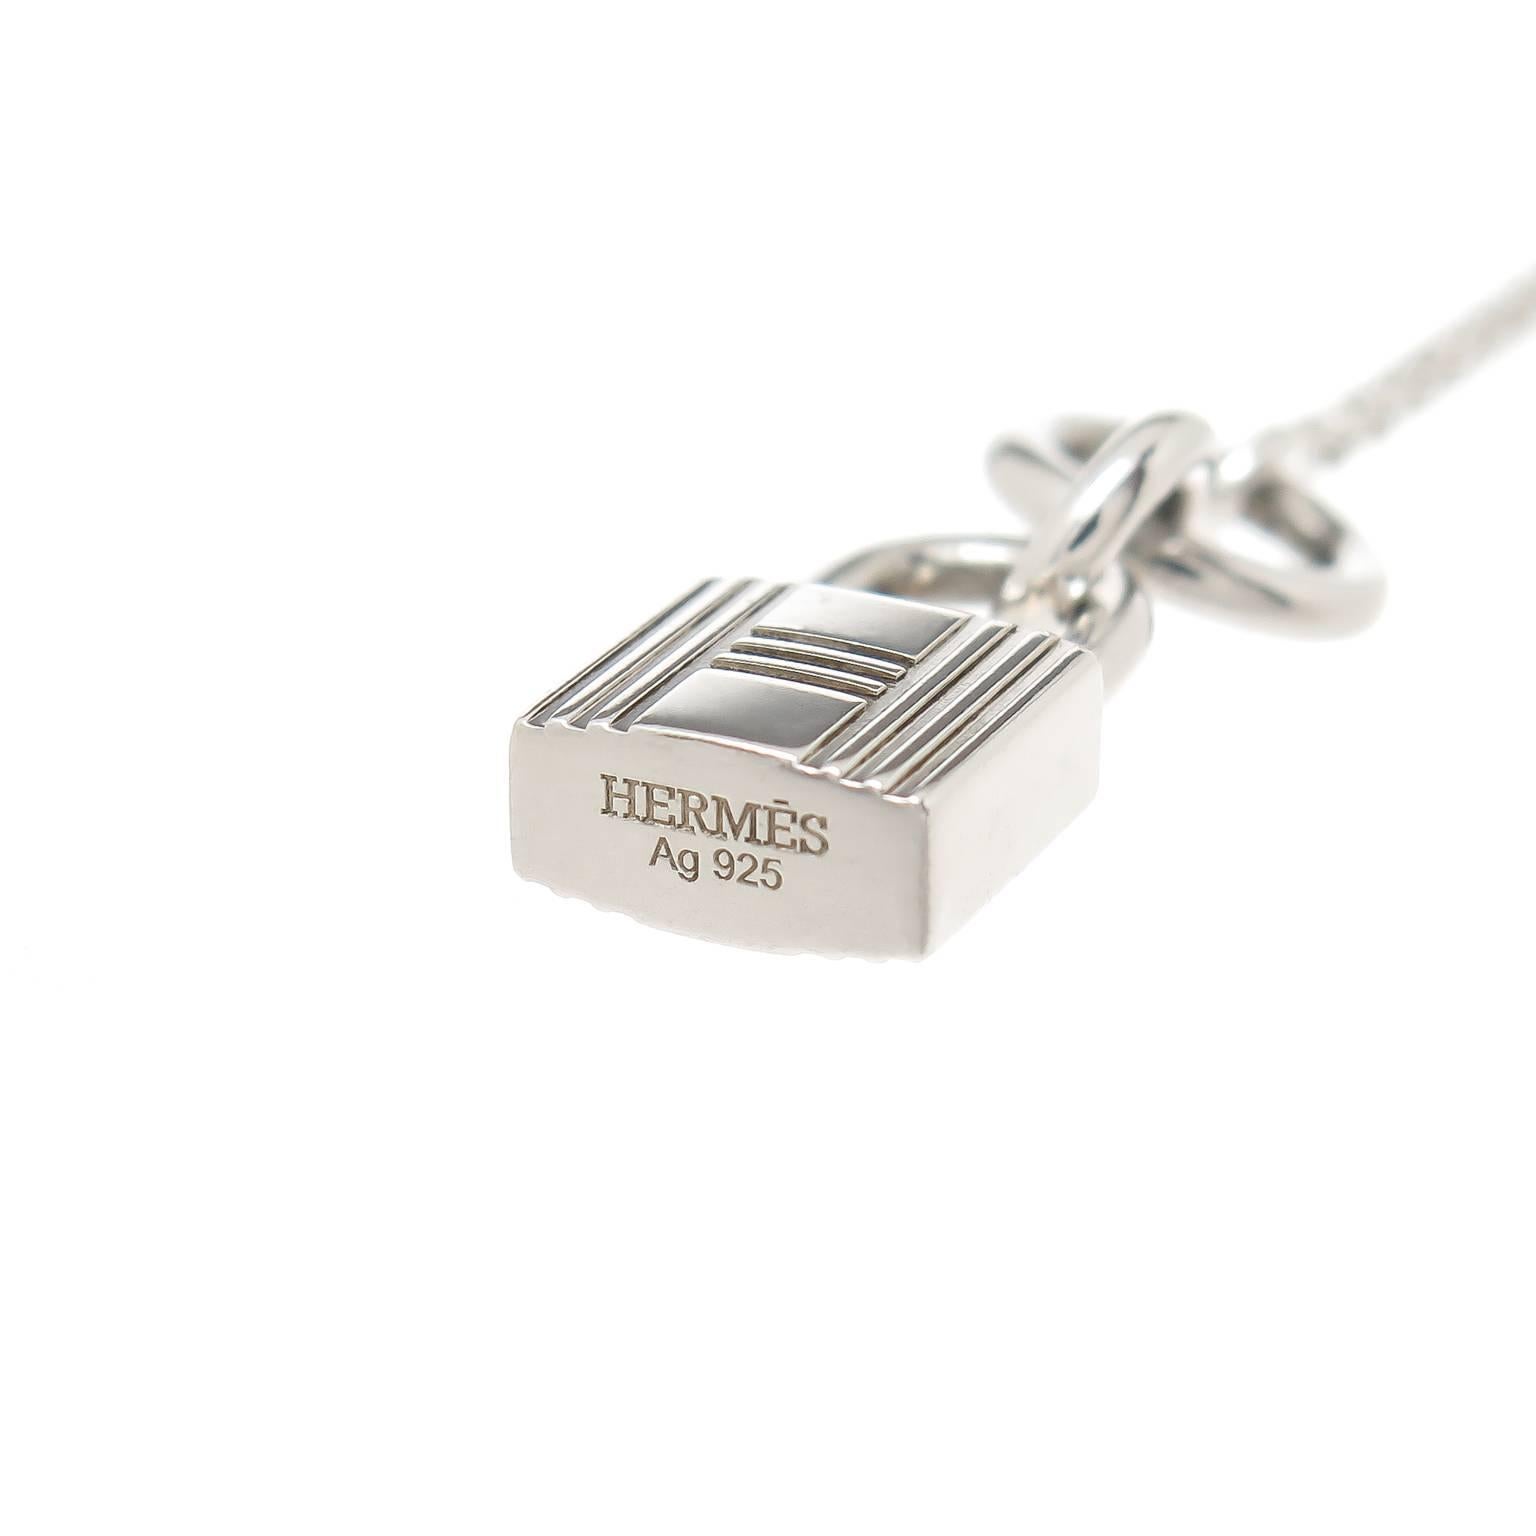 Circa 2014 Hermes Sterling Silver Kelly Cadenas Lock Pendant, measuring 3/4 inch in length and suspended from a 16 inch link chain with Toggle Fastener. This piece is new, unworn and comes in the original Hermes presentation box.